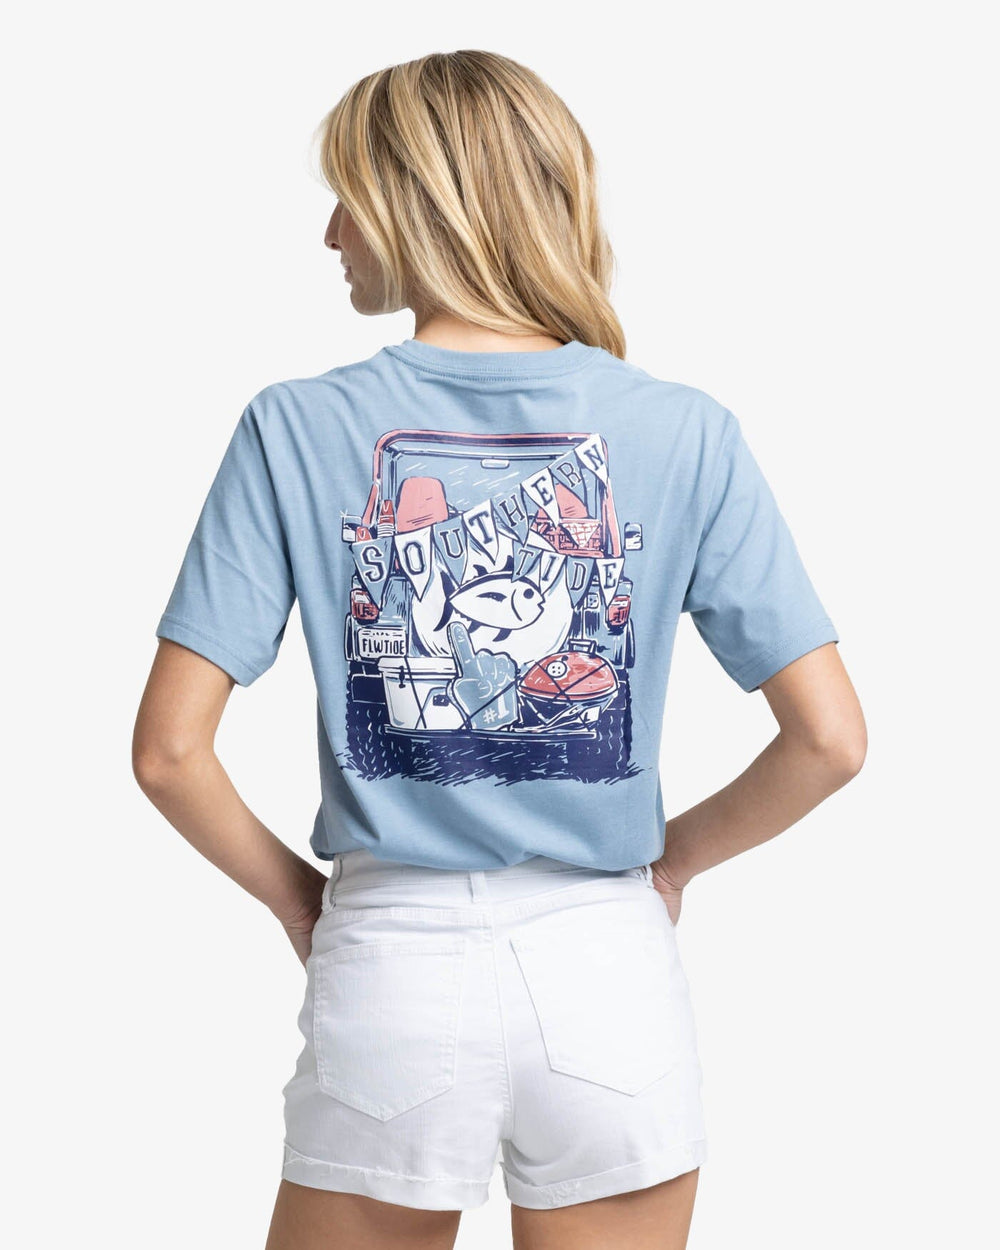 The back view of the Southern Tide Tailgate Ready Heather Short Sleeve T-Shirt by Southern Tide - Heather Blue Shadow